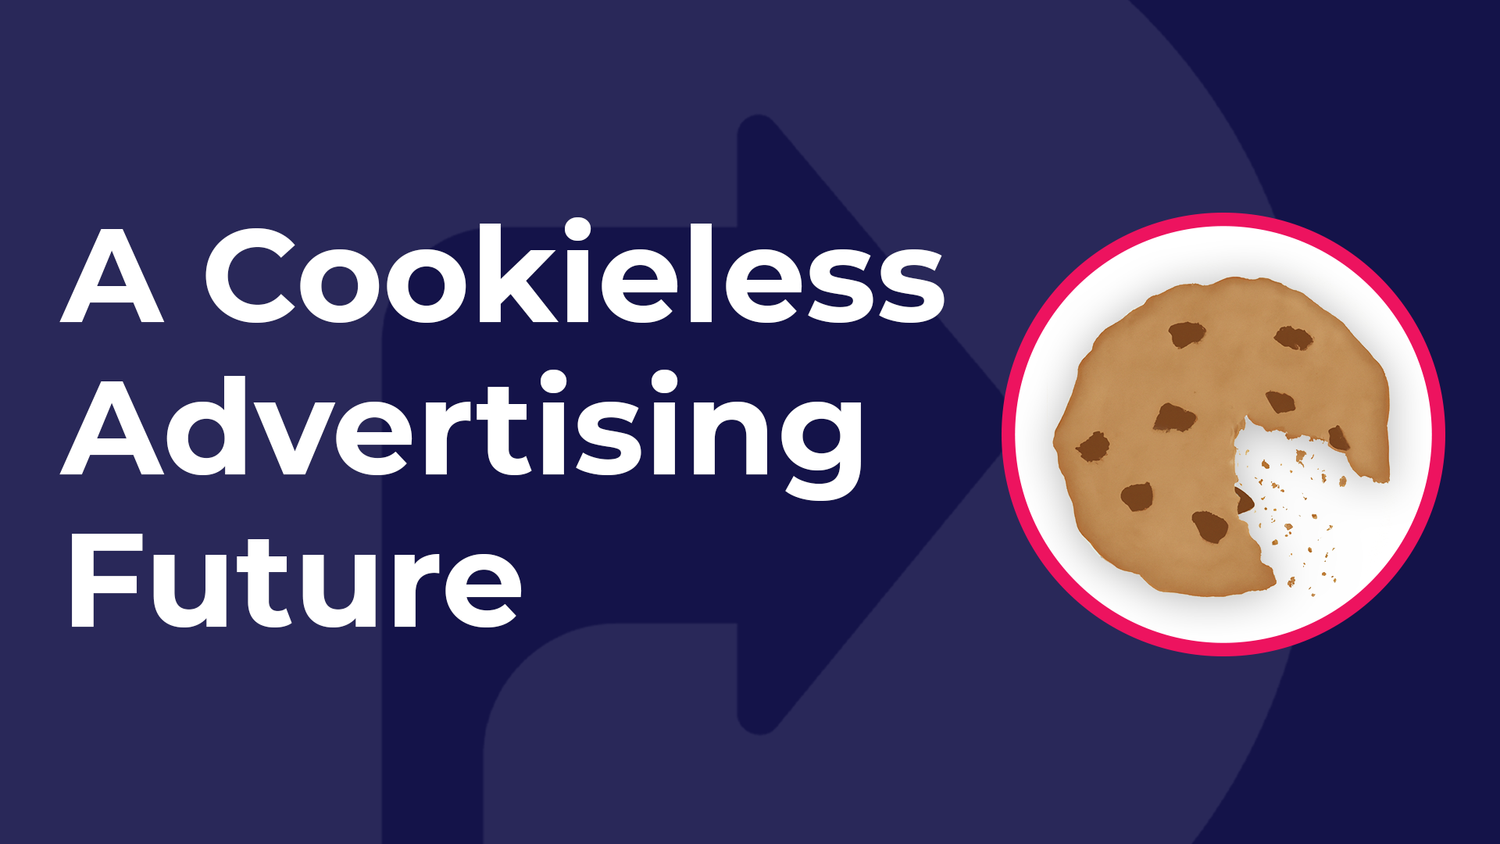 Cookie-less advertising